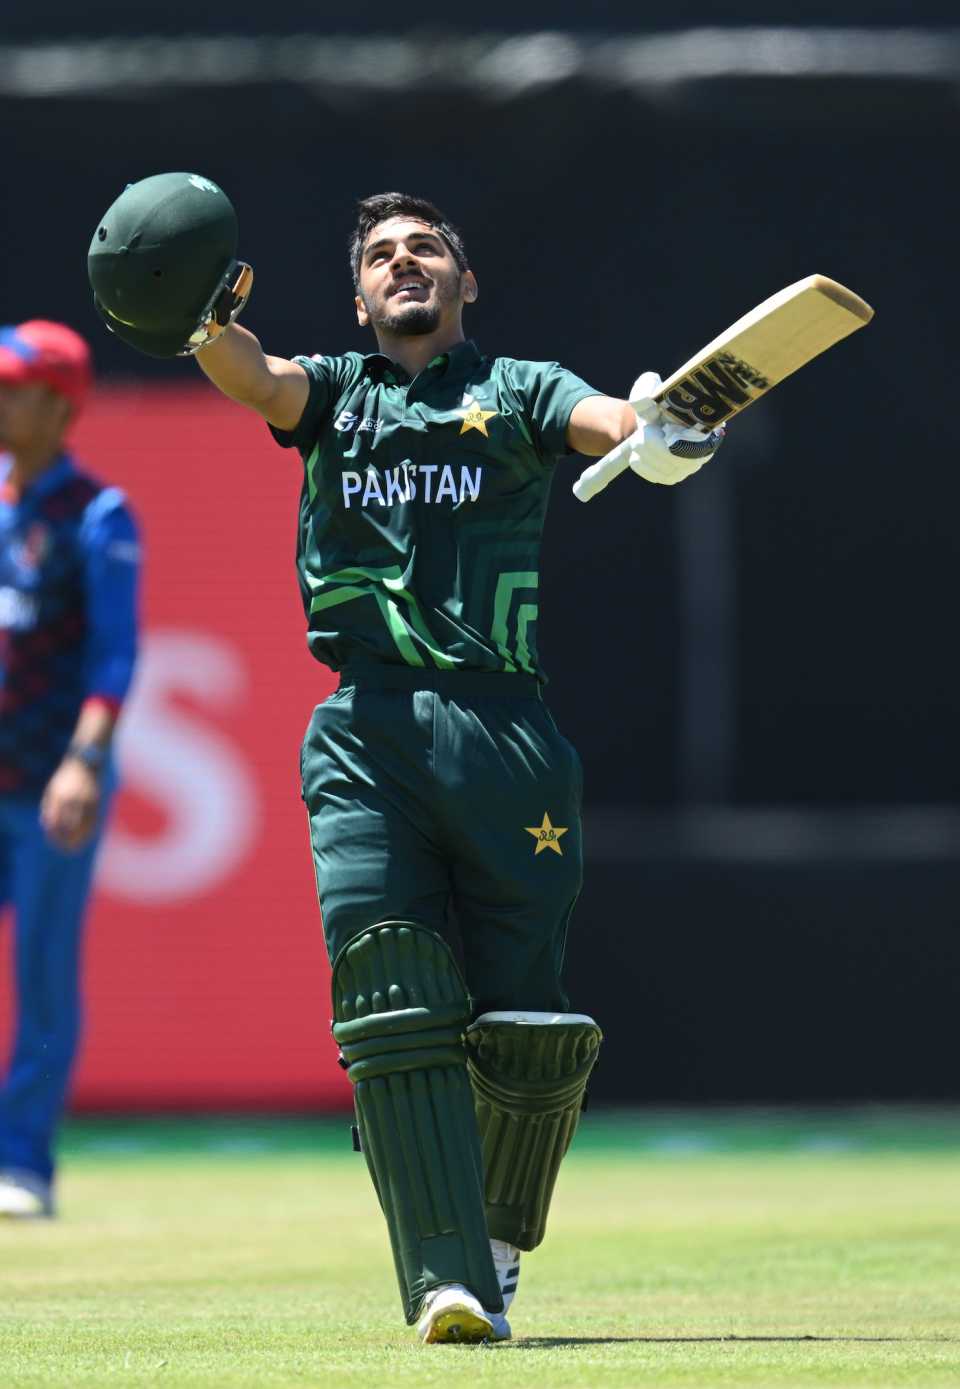 Shahzaib Khan almost batted through the innings, scoring 106 from 126 balls